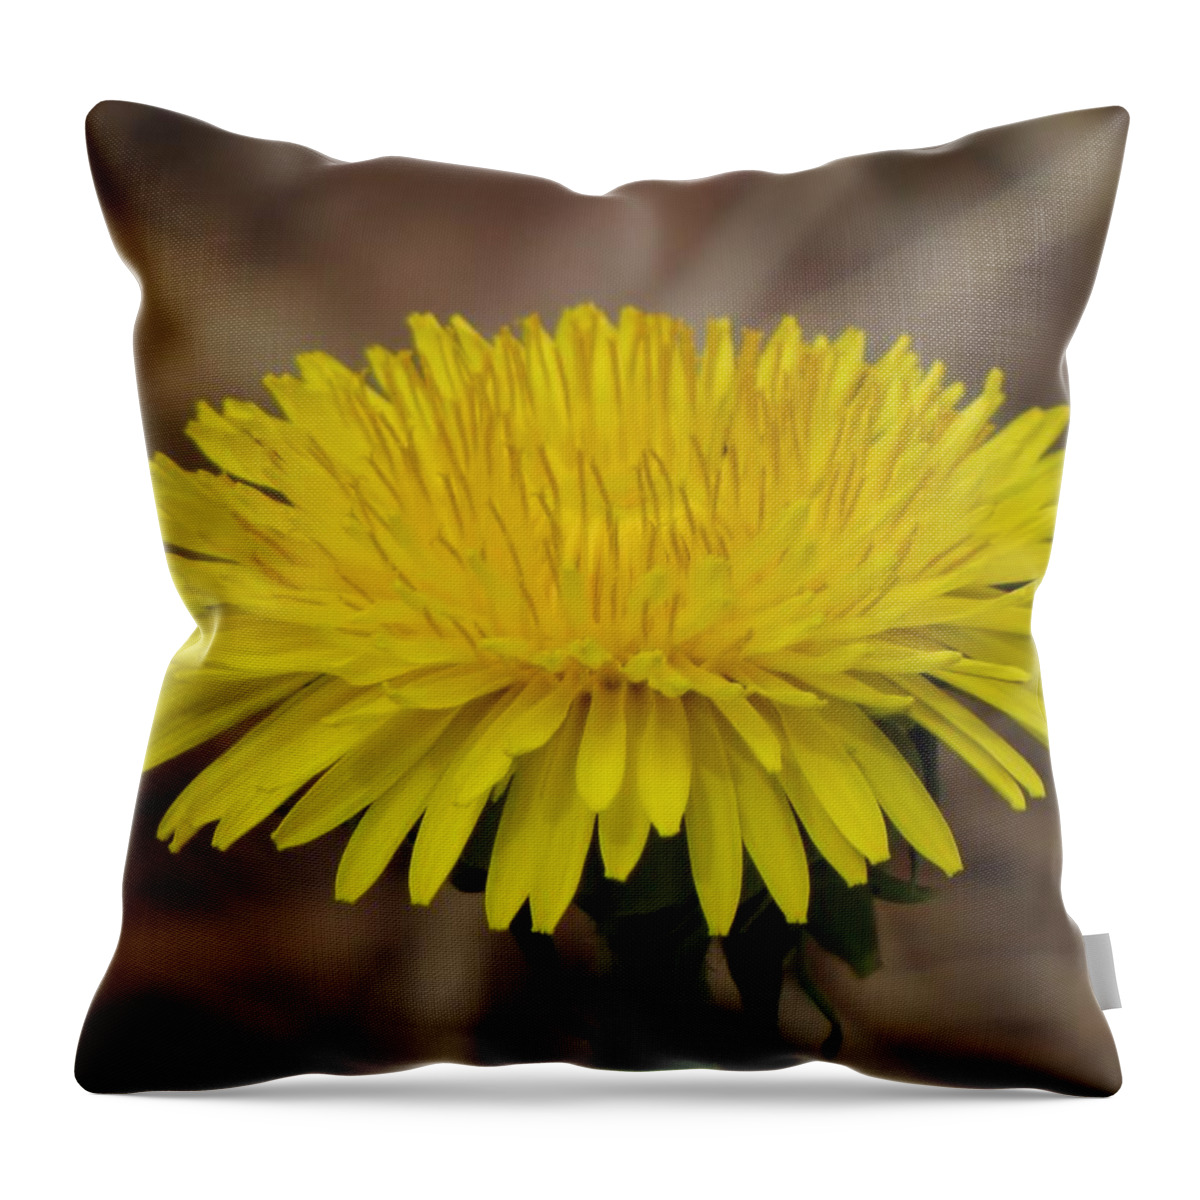 Dandelion Throw Pillow featuring the photograph Dandy Lion by MTBobbins Photography